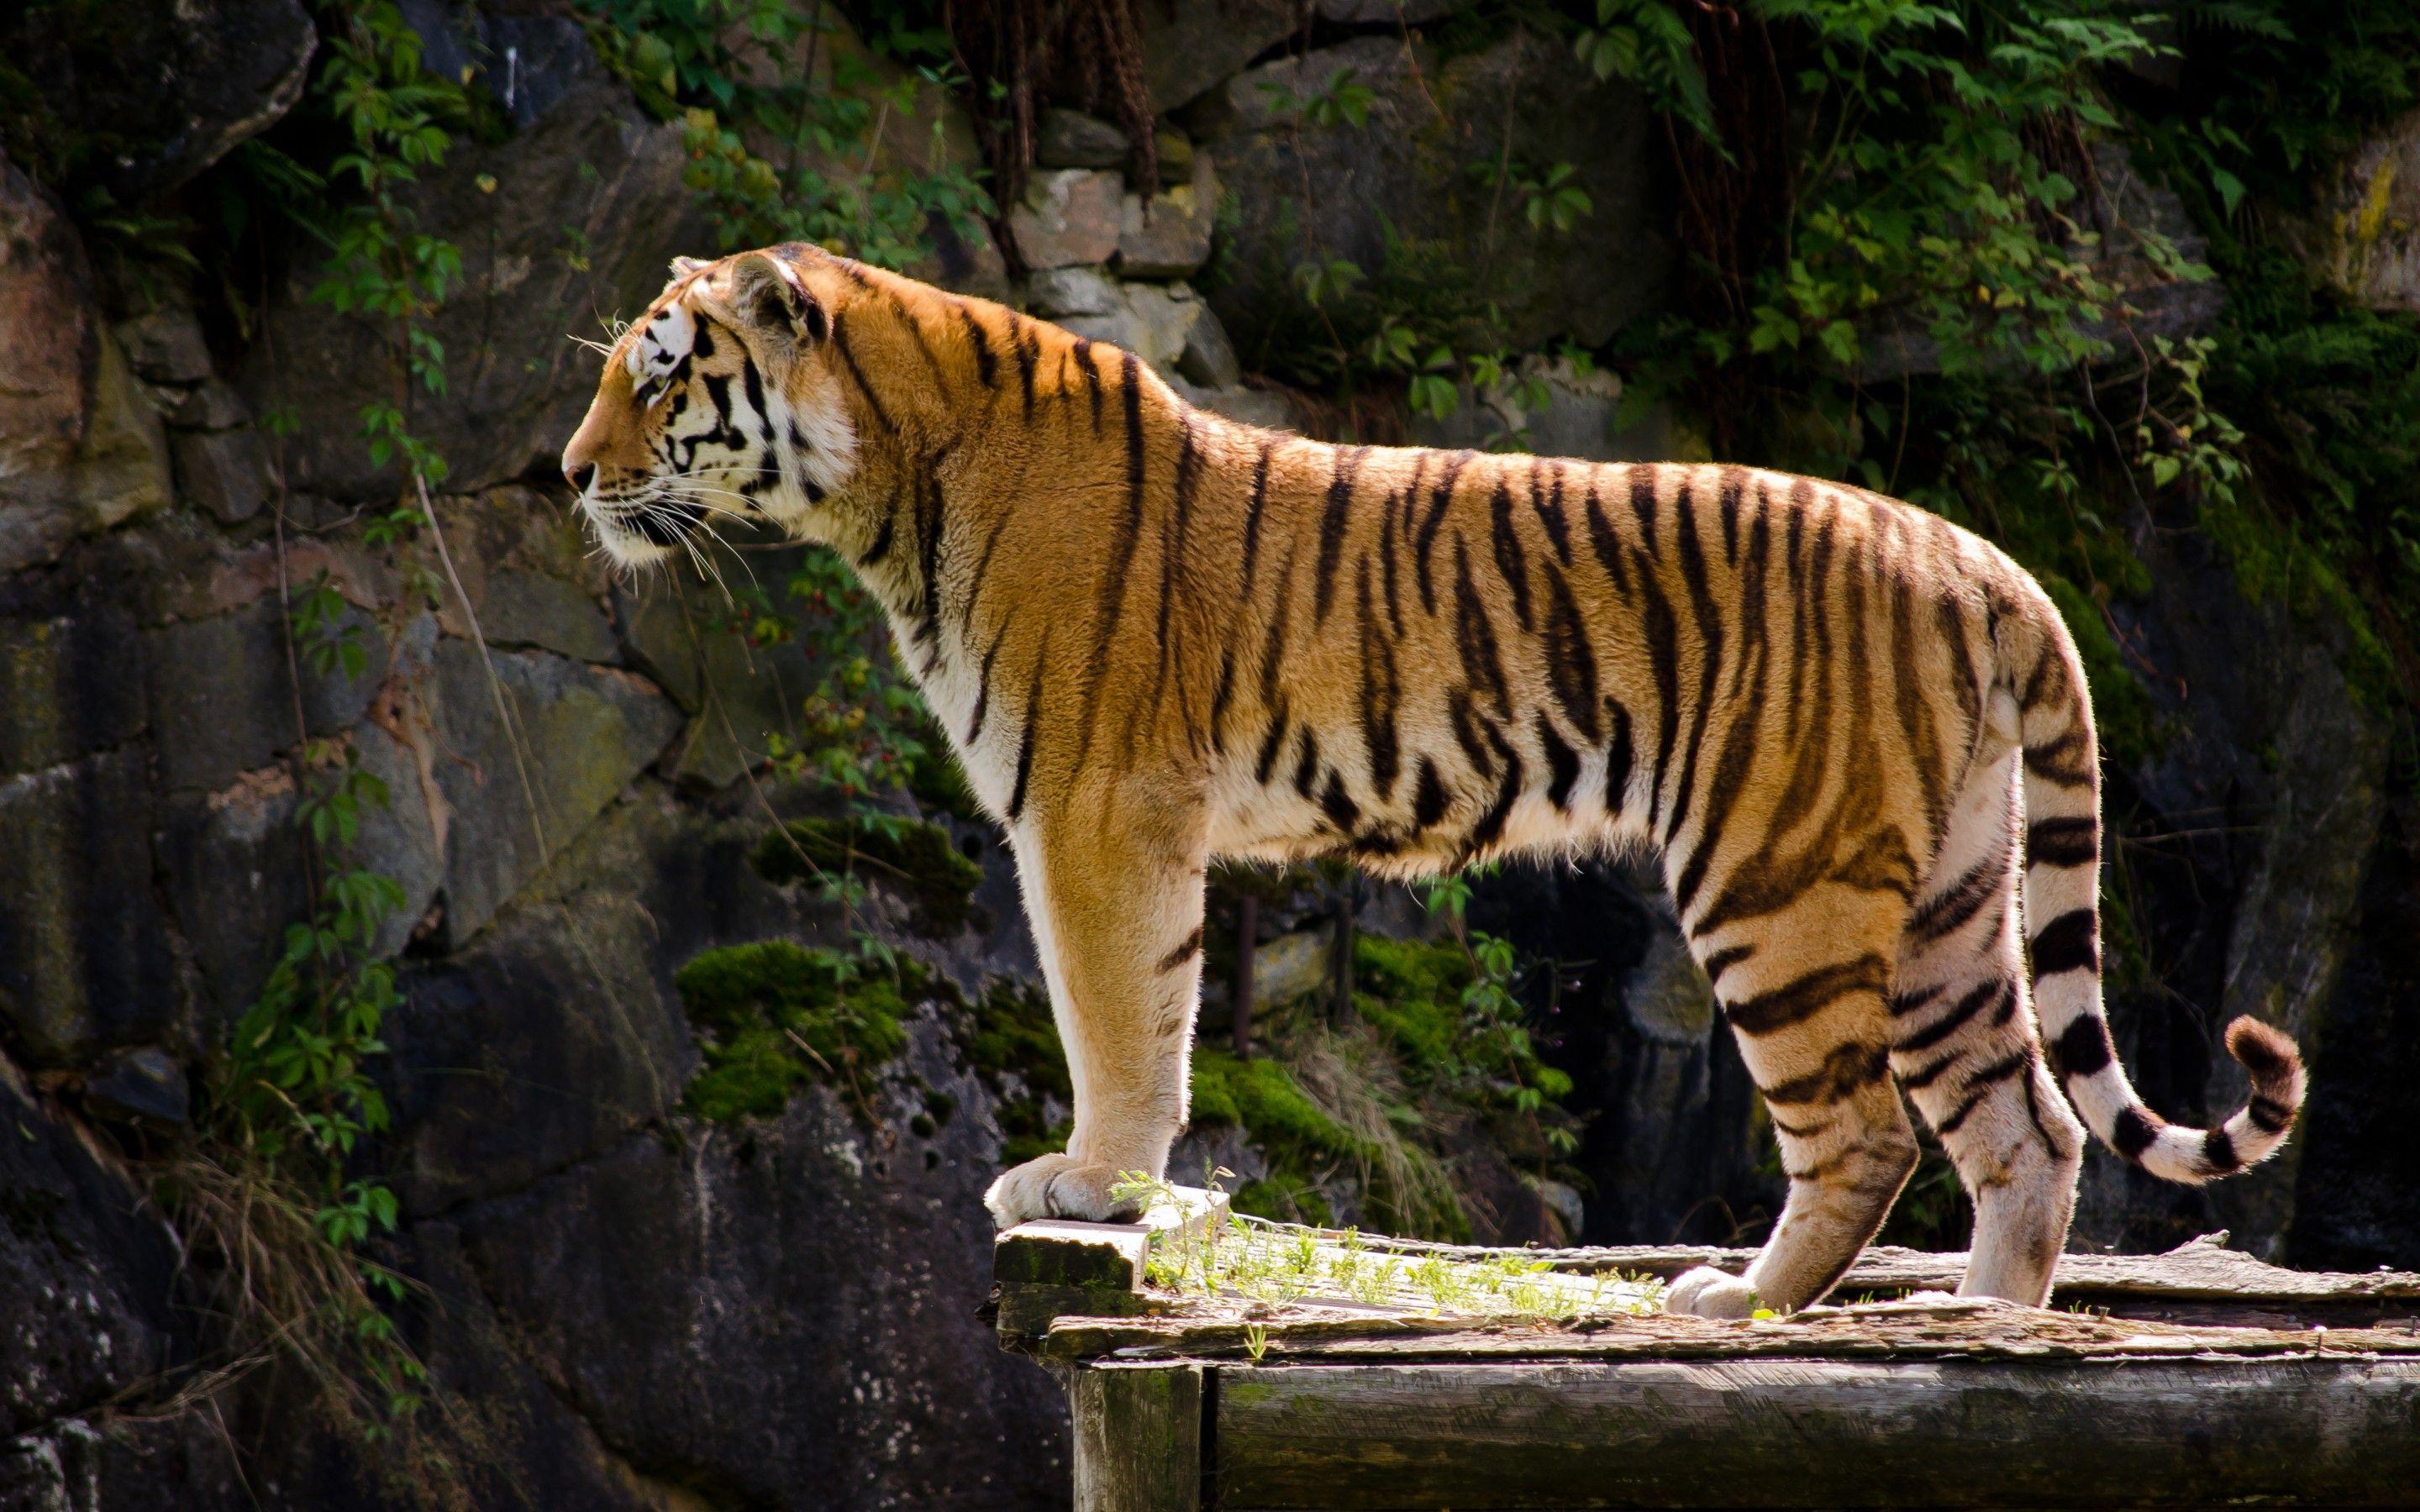 Tiger Wallpaper Background Image. View, download